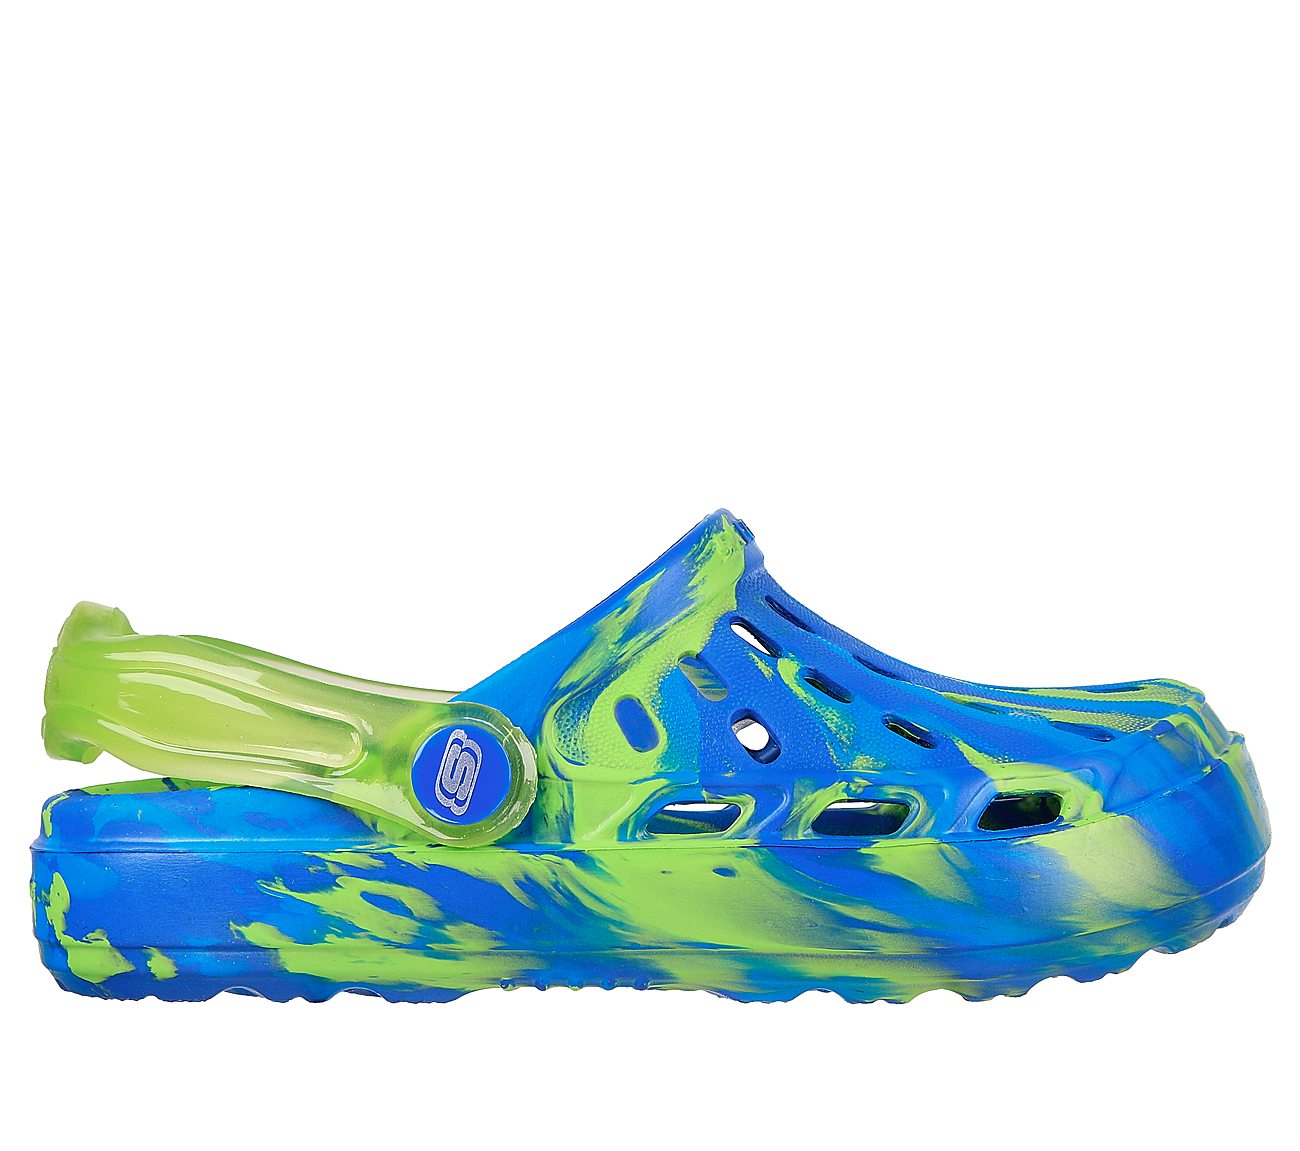 SWIFTERS-TRANSLUMINATOR, BLUE/LIME Footwear Lateral View